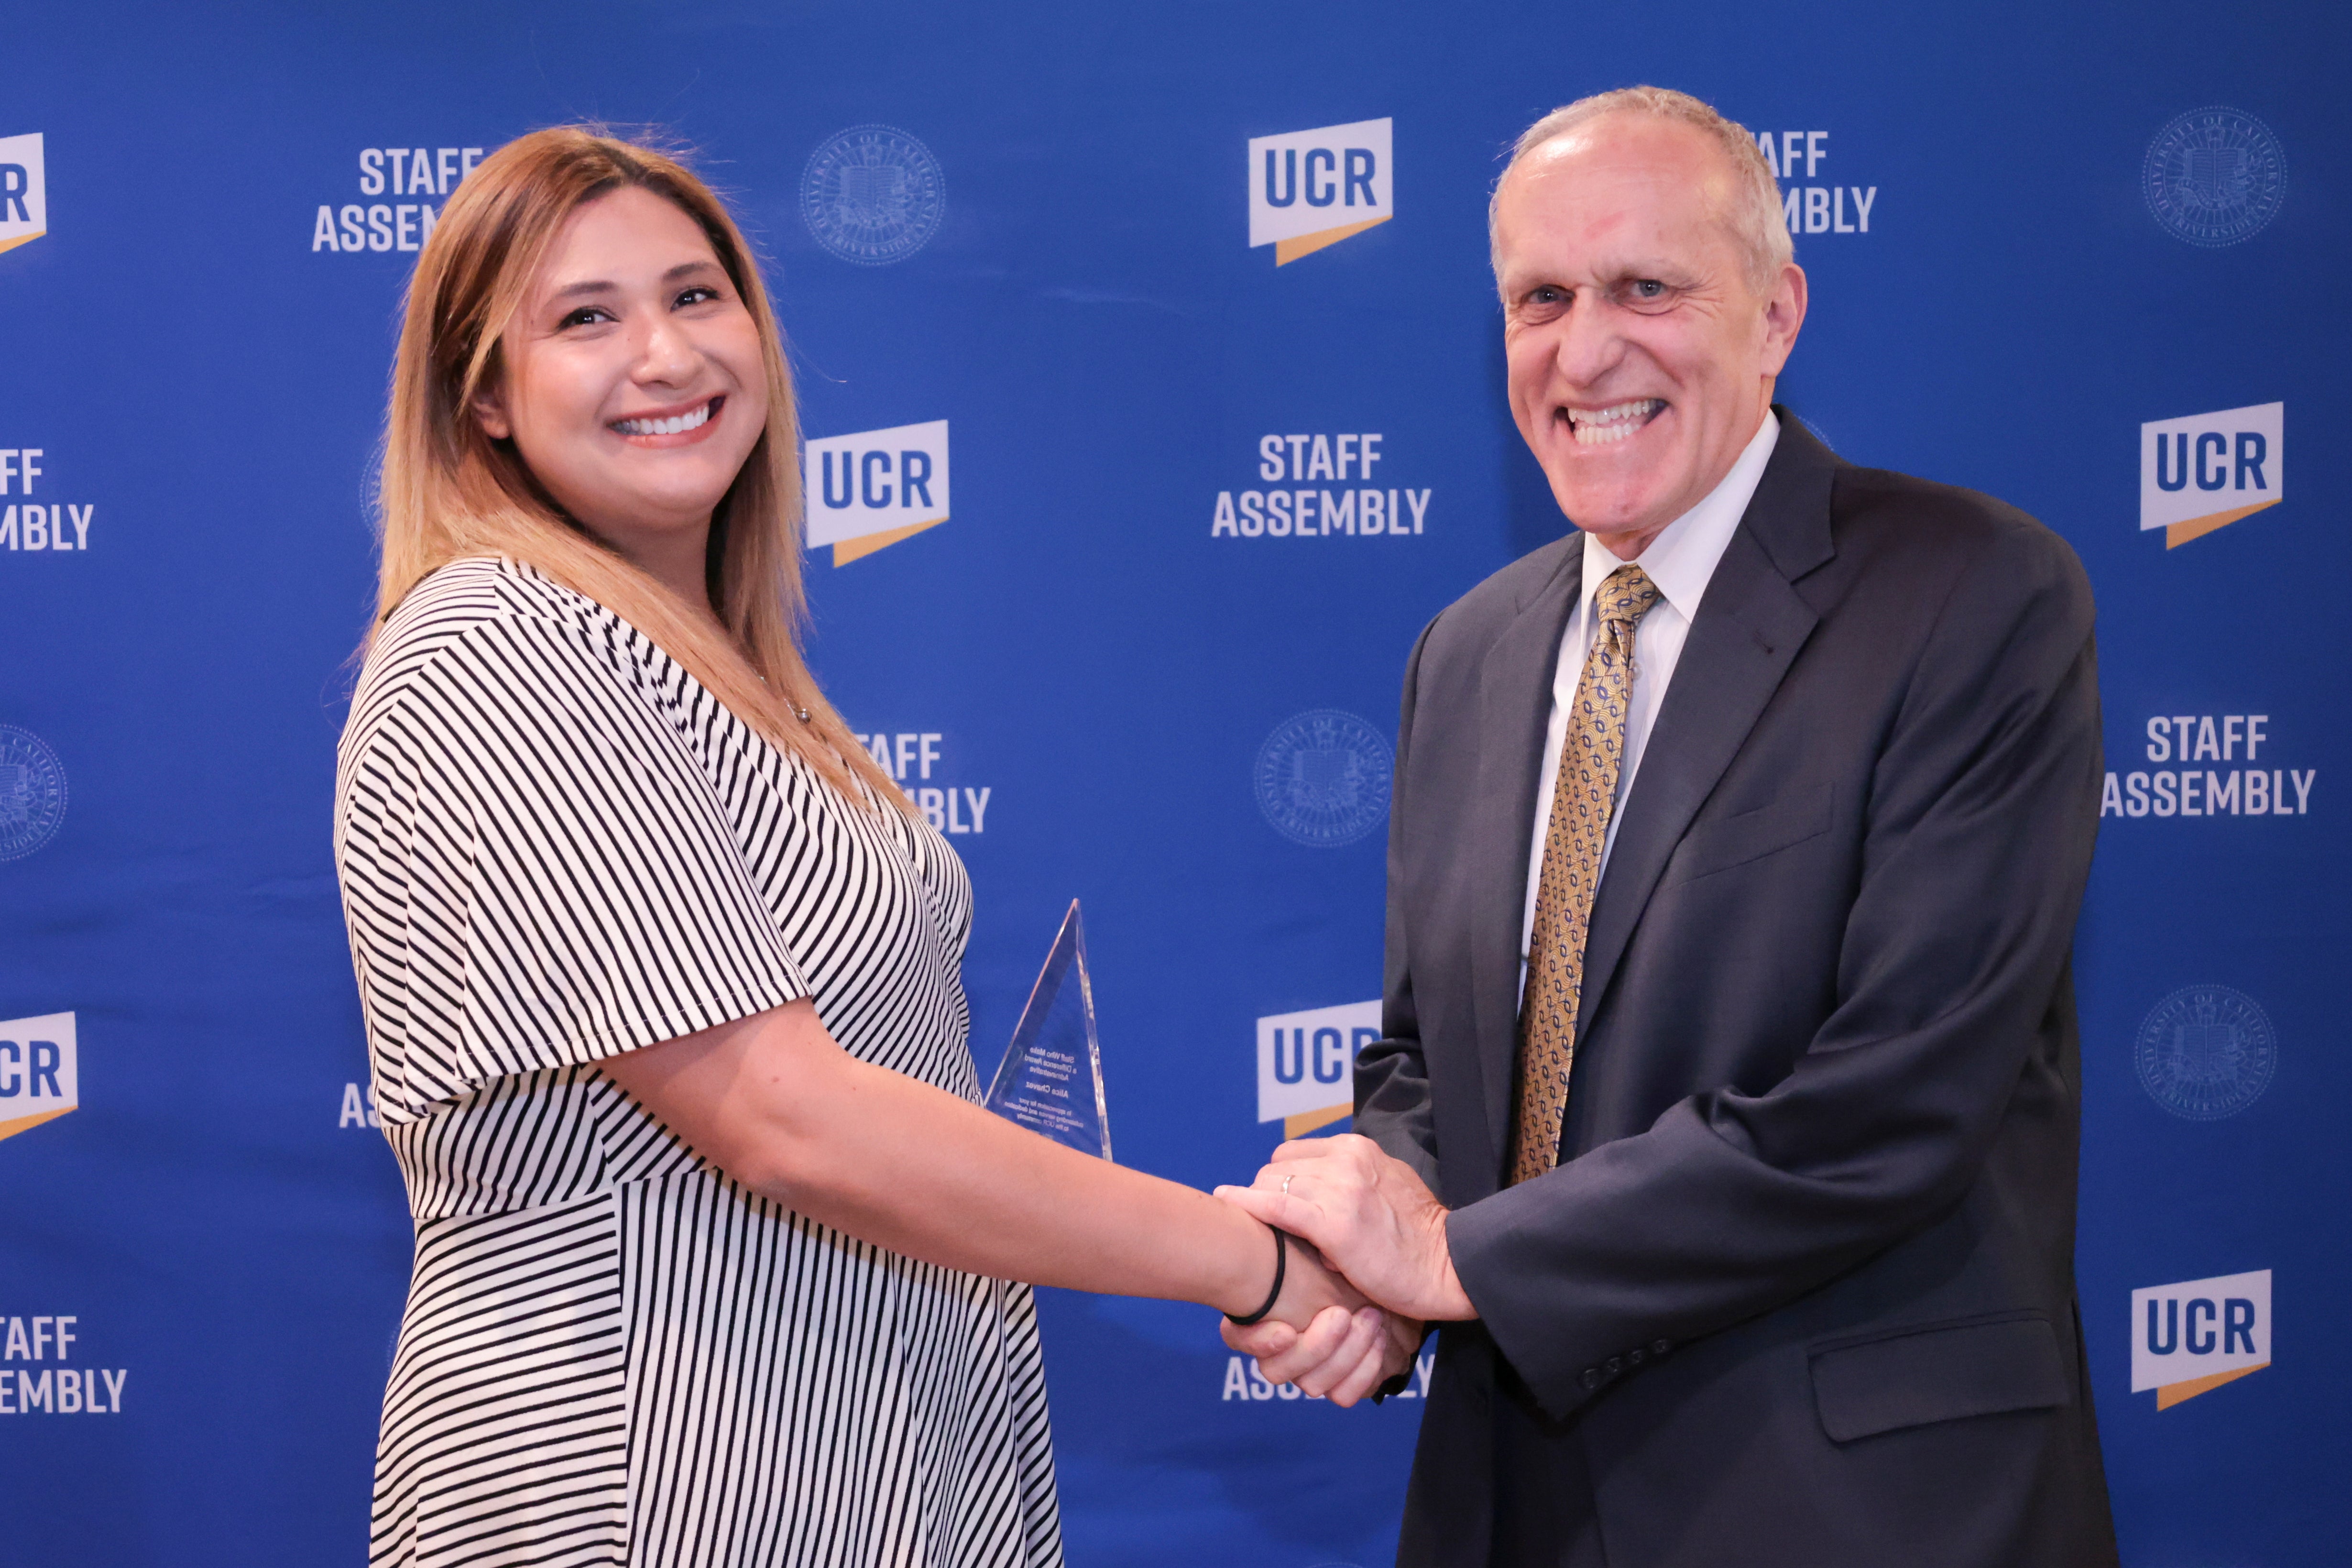 Staff Who Make a Difference award winner Alice Chavez with Chancellor Wilcox at the 2022 Outstanding Staff Awards